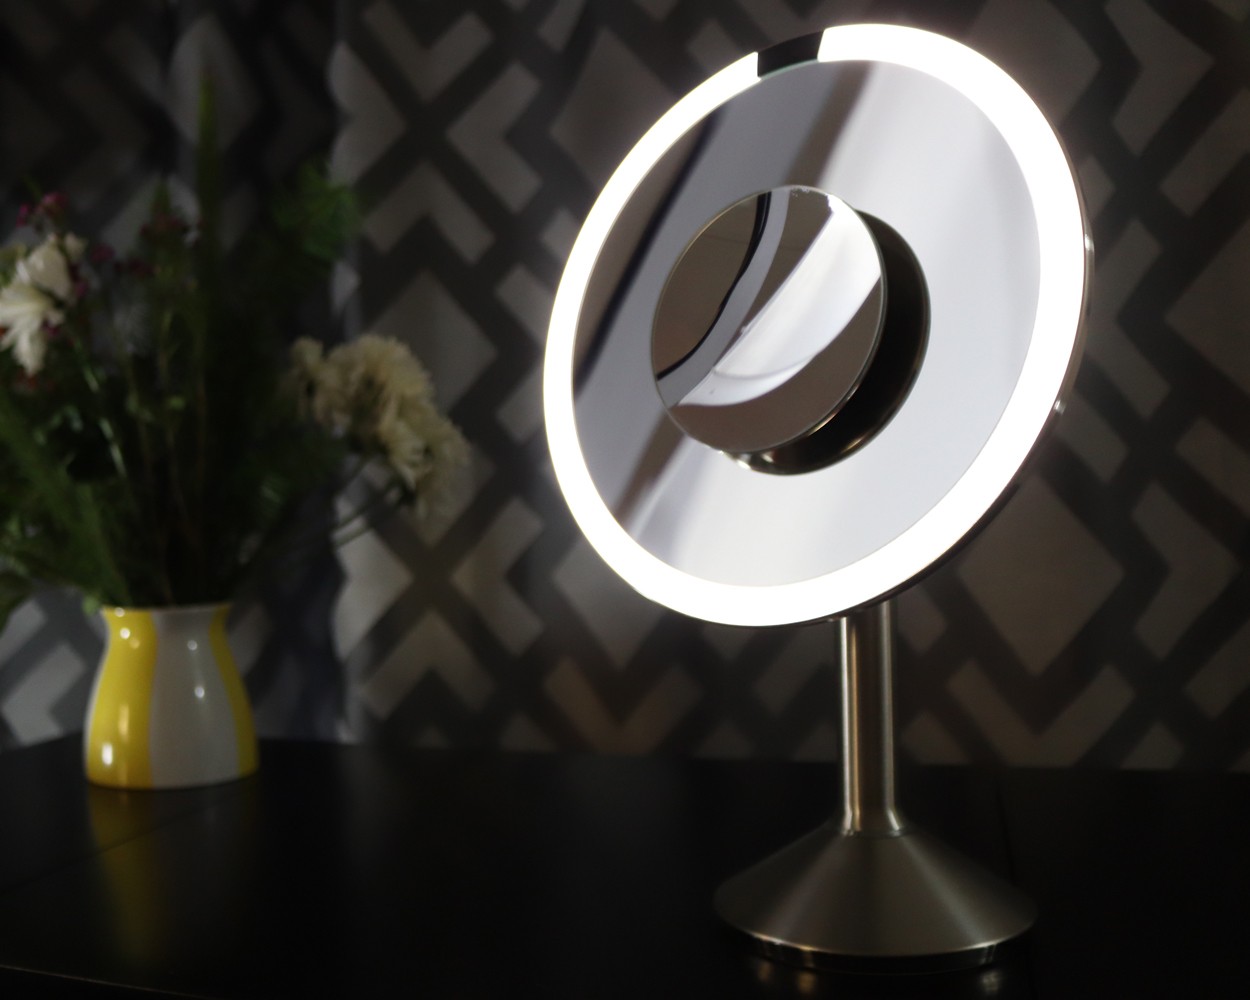 SimpleHuman Sensor Mirror 8 Inch Pro Review - SimpleHuman Mirrors Changed My Makeup Game by LA cruelty free beauty blogger My Beauty Bunny